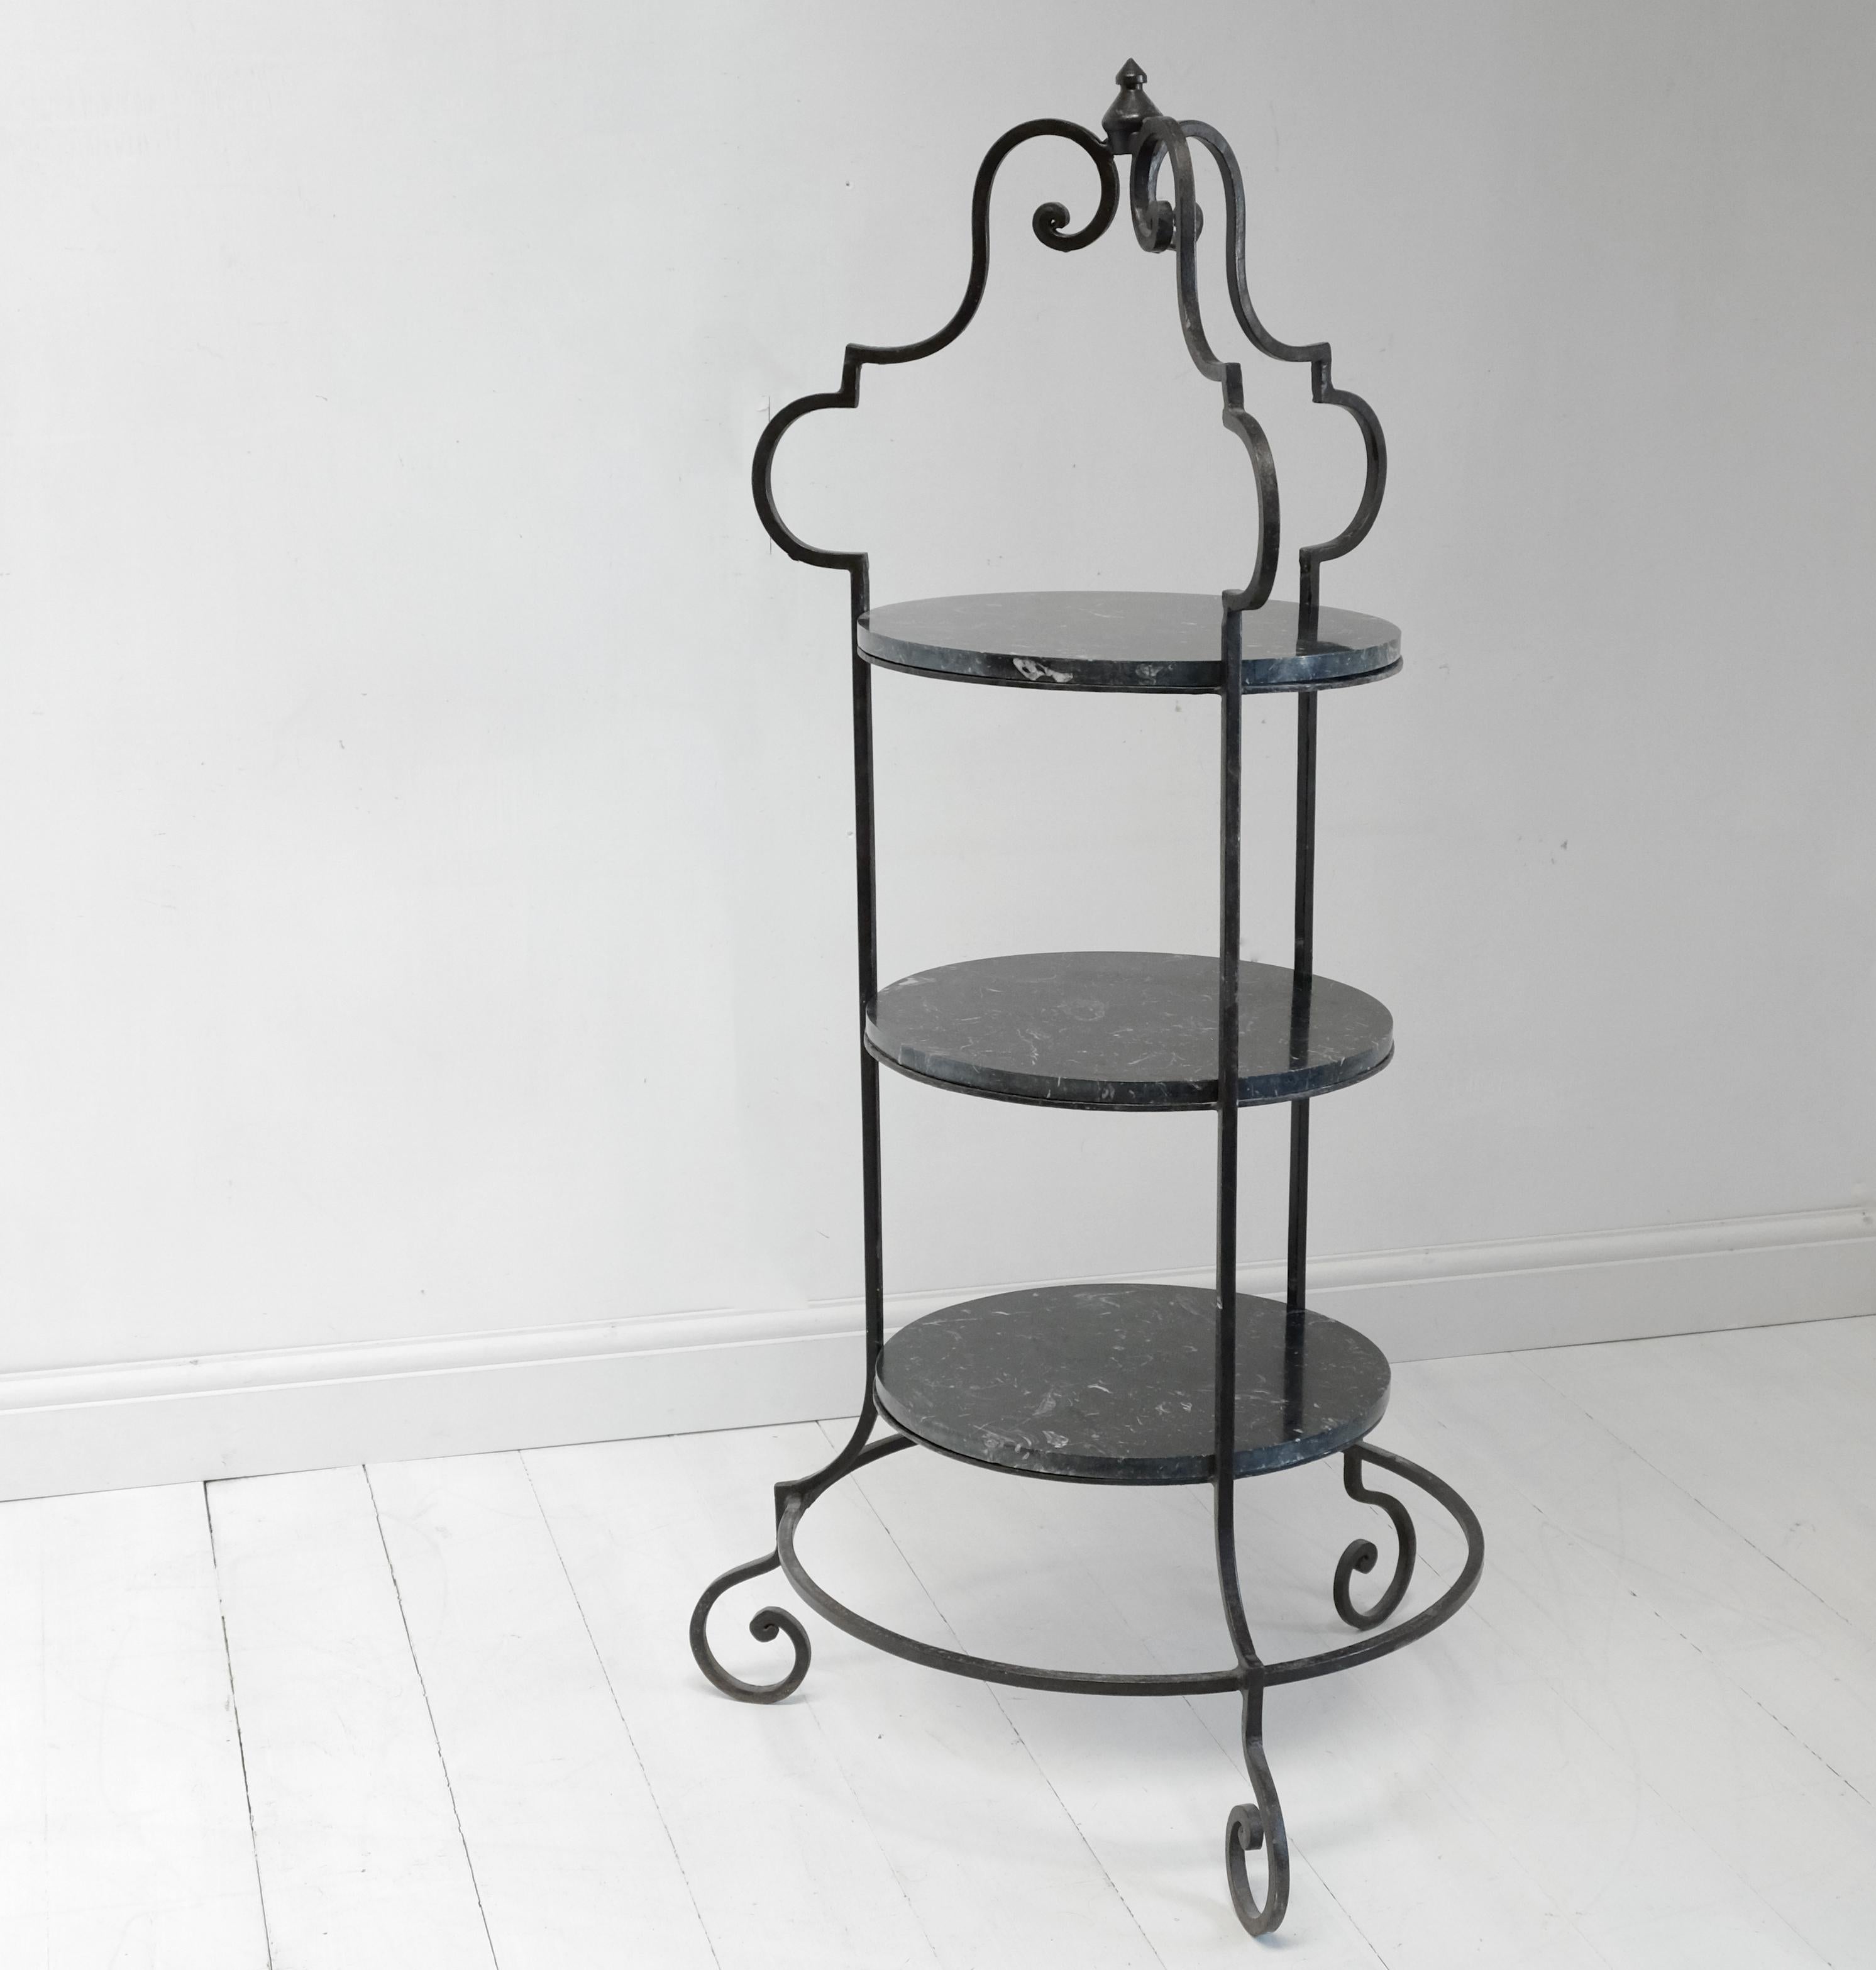 A large and incredibly stylish pâtisserie stand, handmade in wrought iron and finished with Nero Marquina marble. No great age, likely late 20th century but its sheer quality and style are second to none. We’ve only seen a couple like this in a